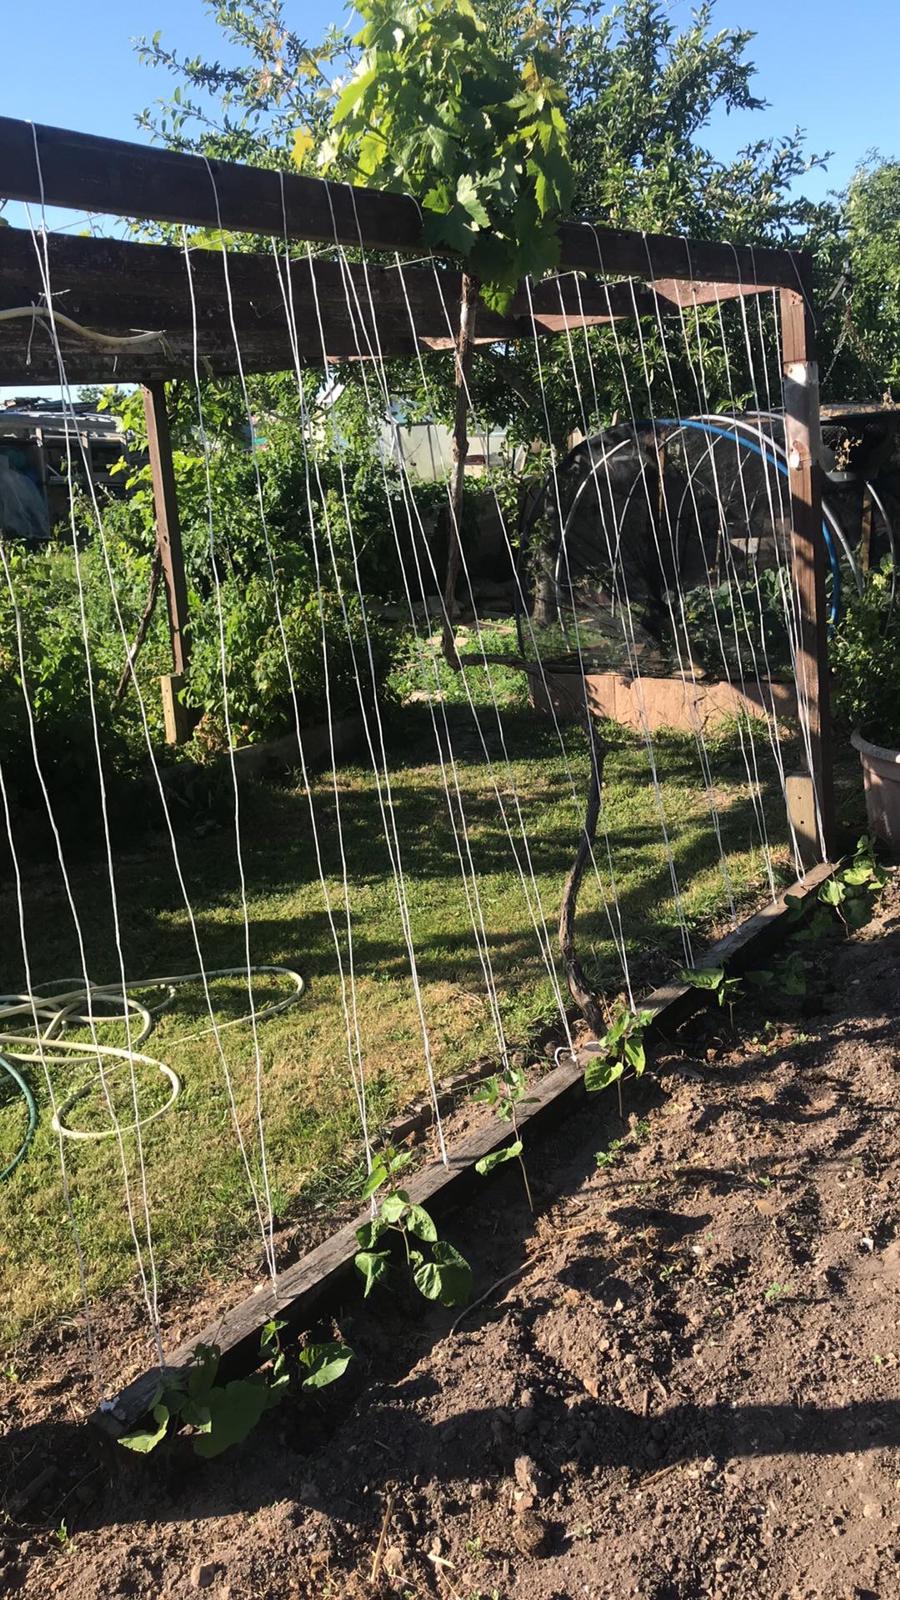 A family grew vegetables and kept chickens during lockdown 2